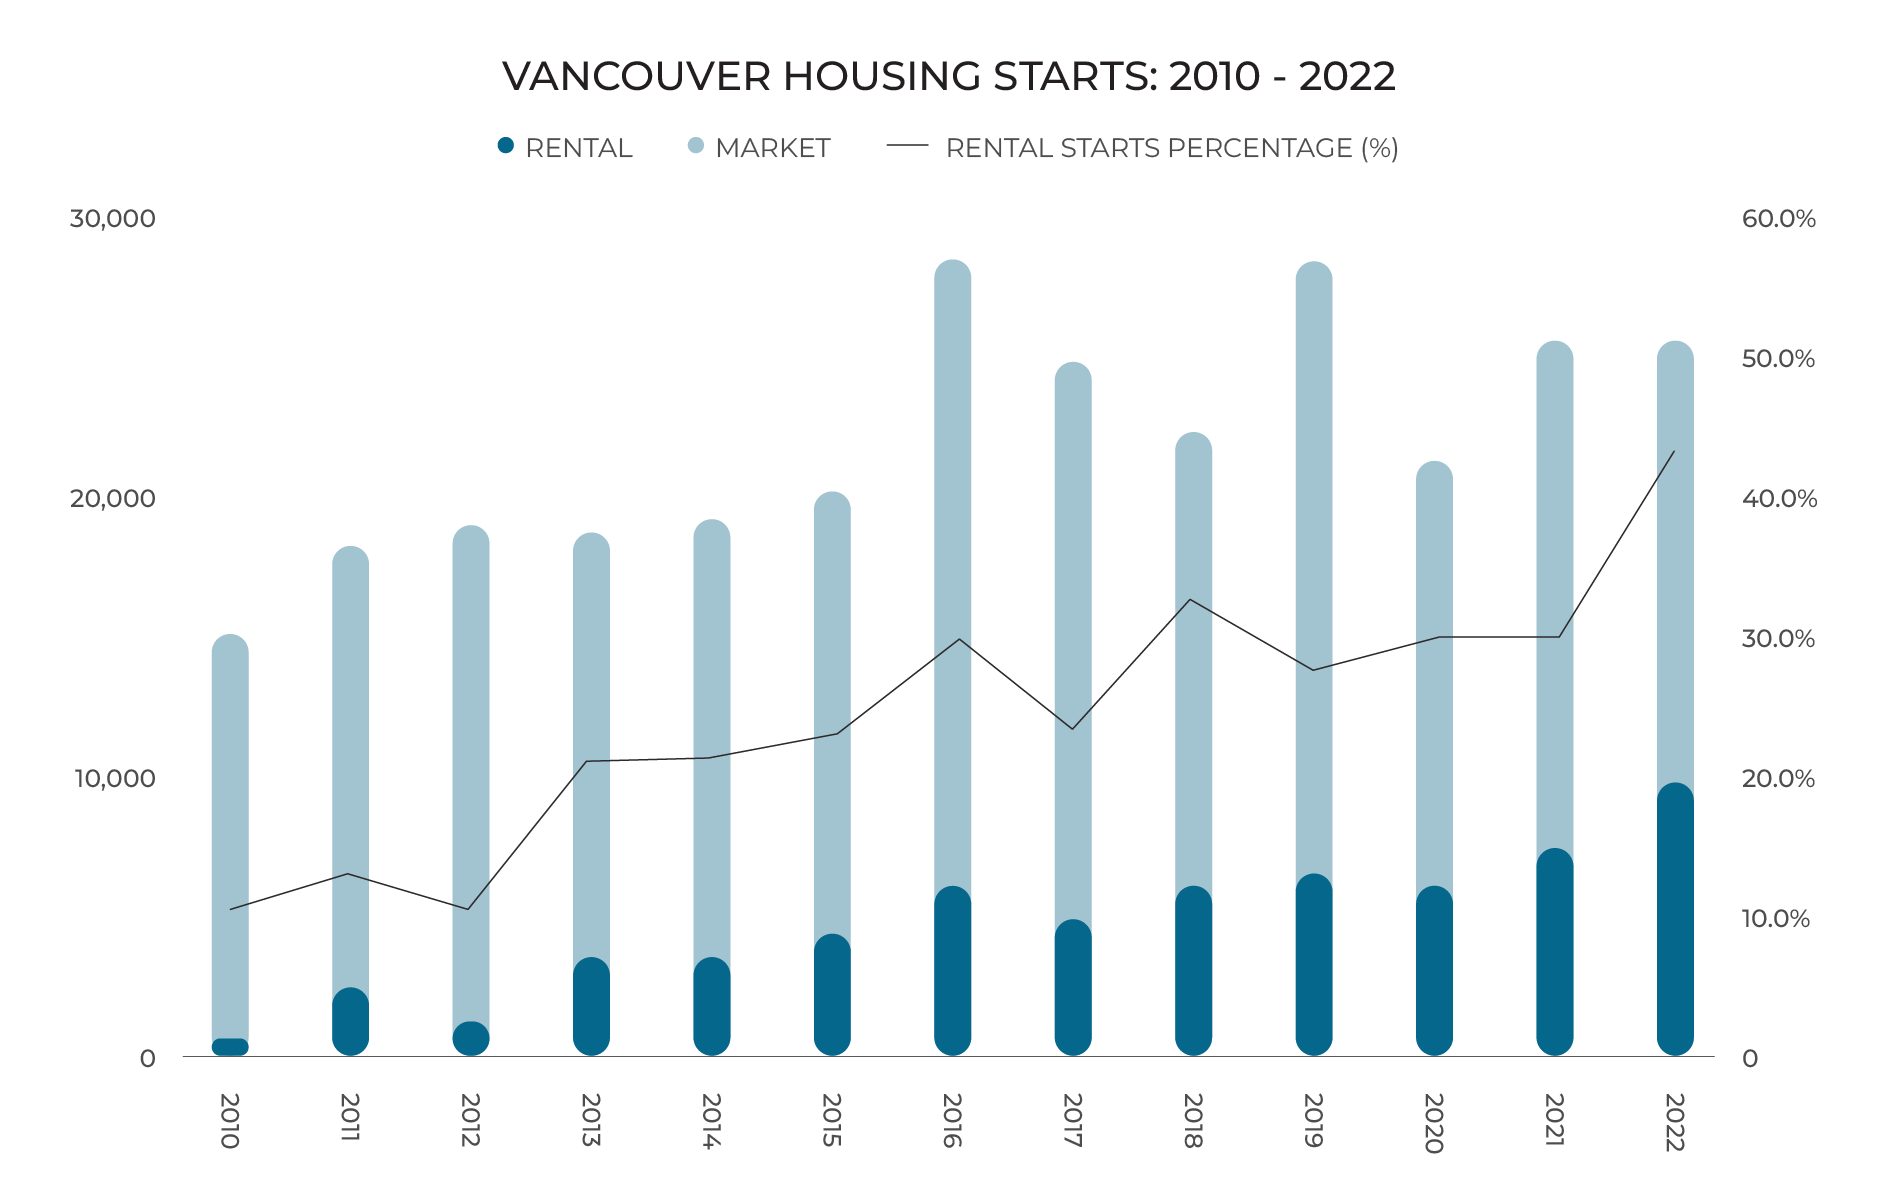 Vancouver Housing Starts: 2010 - 2022